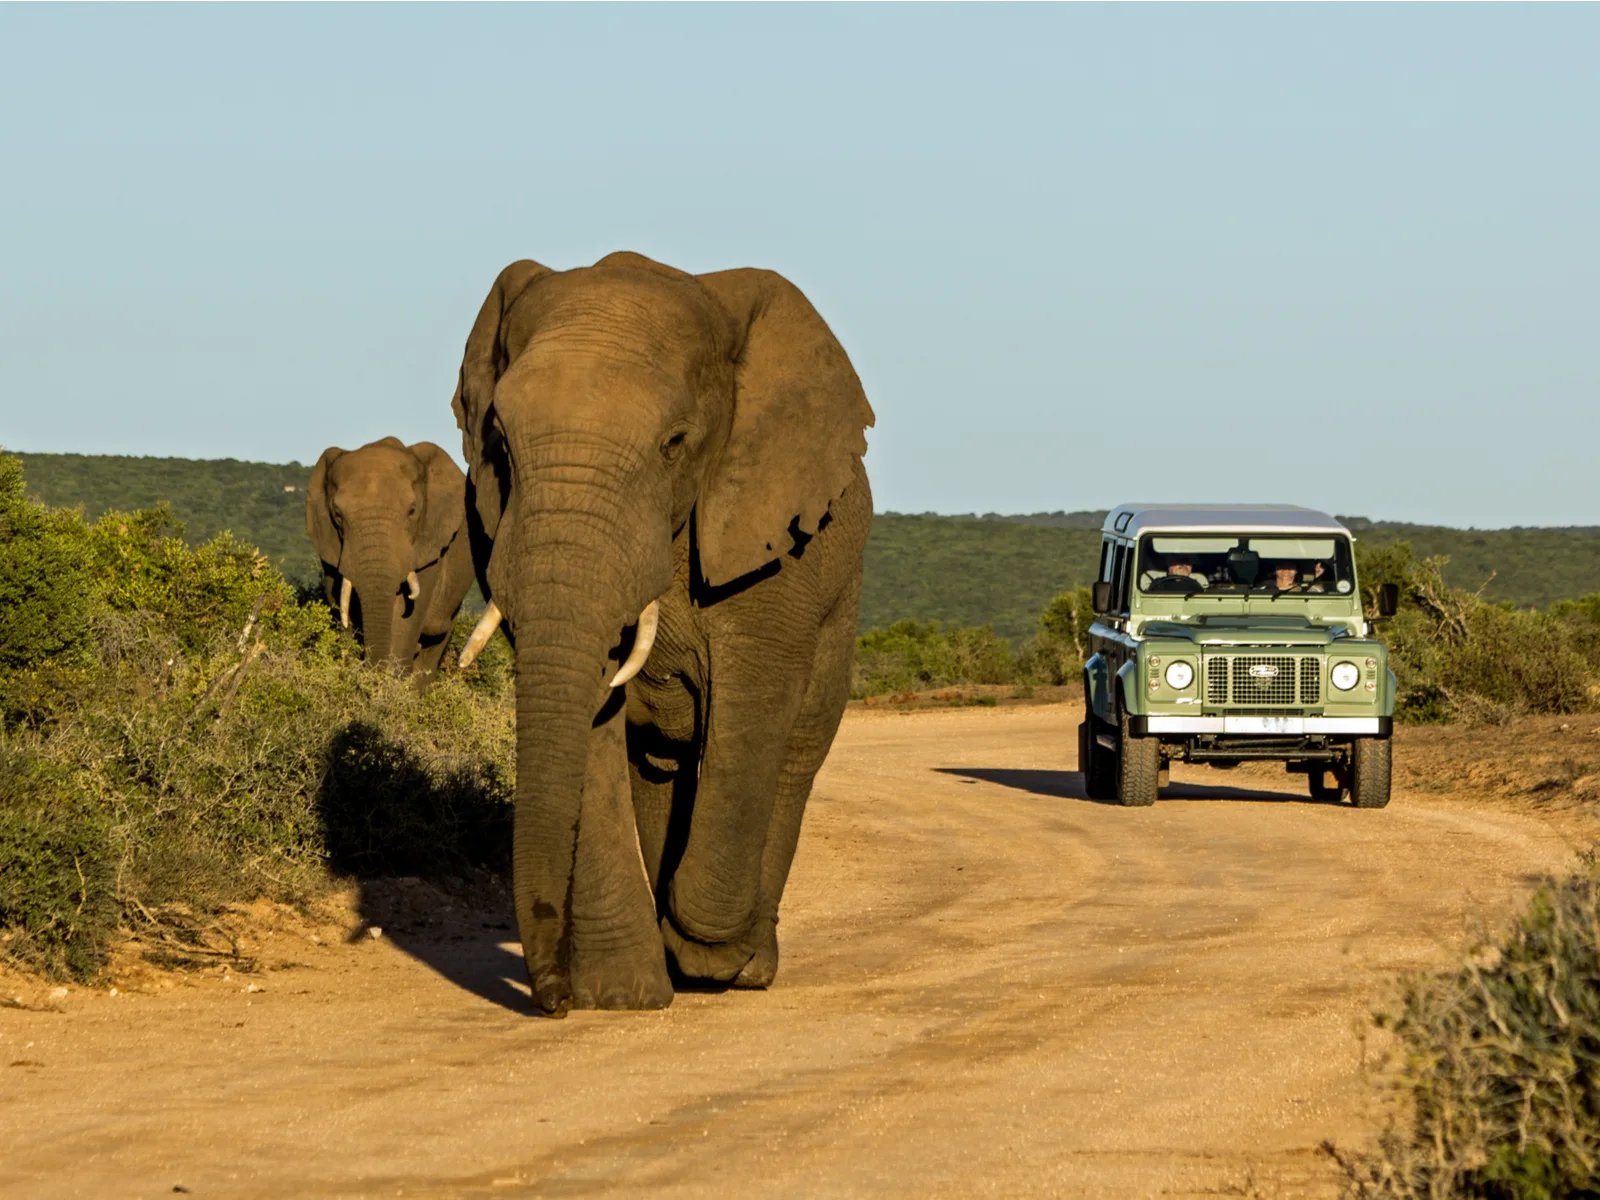 Beautiful elephant walking on a dirt path in front of a Land Rover on a clear day during the best time to visit South Africa